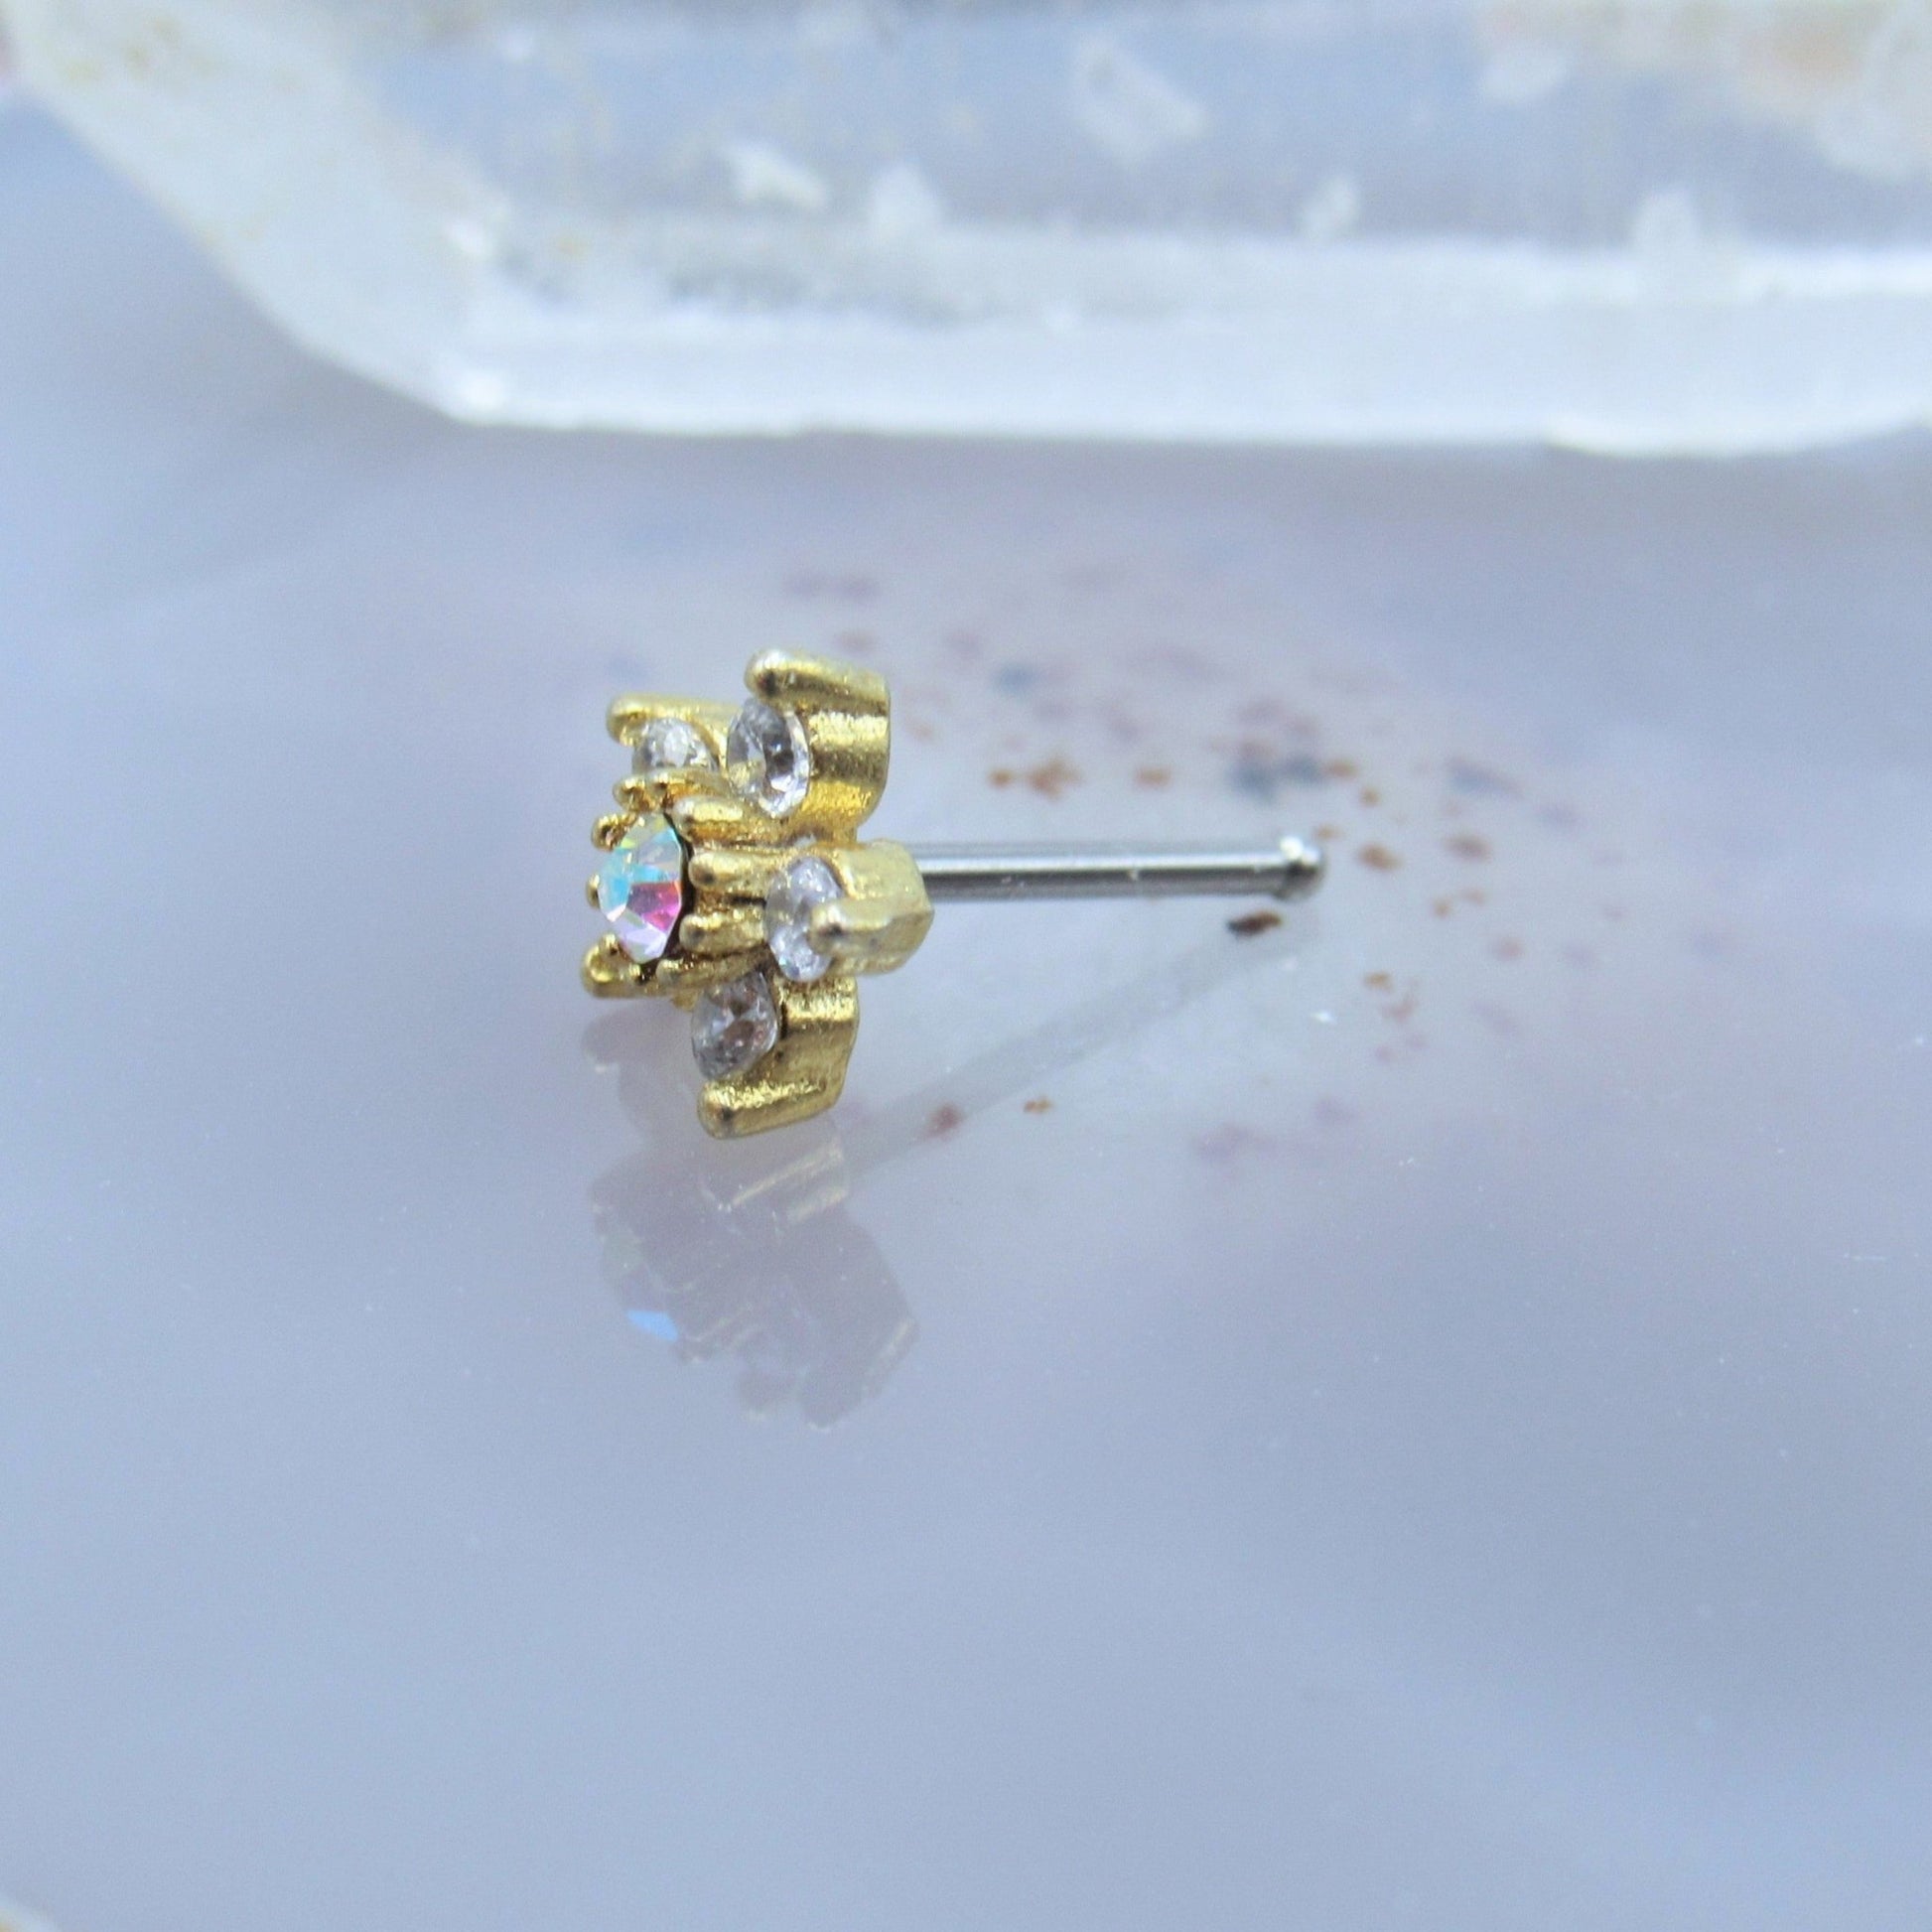 Gold Flower Nose Piercing Stud Jewelry CZ and AB Gemstone Design